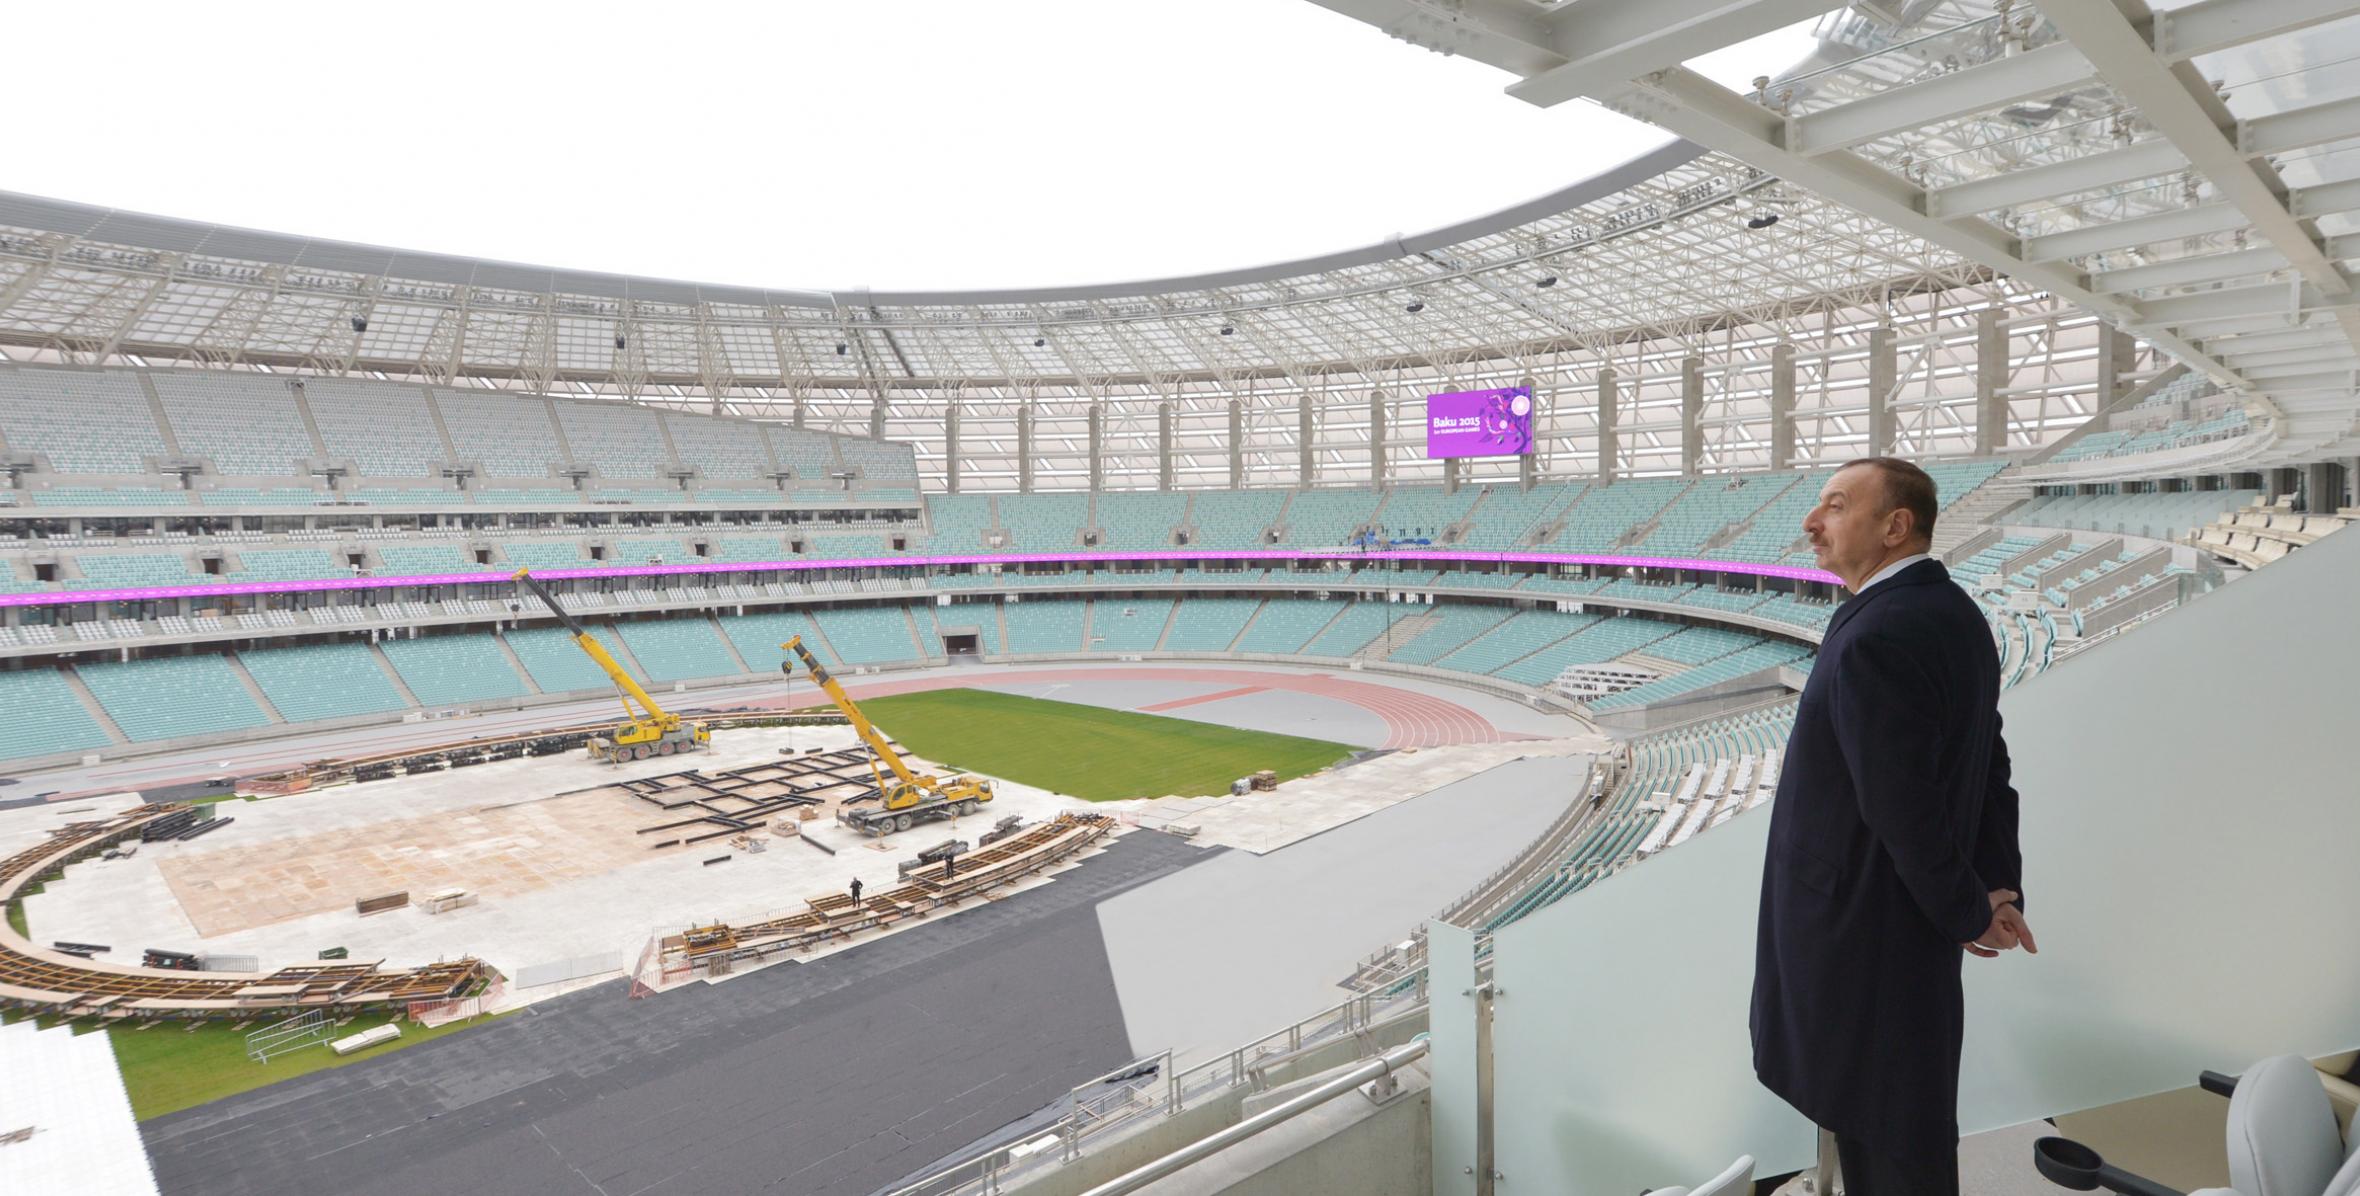 Ilham Aliyev attended the opening of the Baku Olympic Stadium